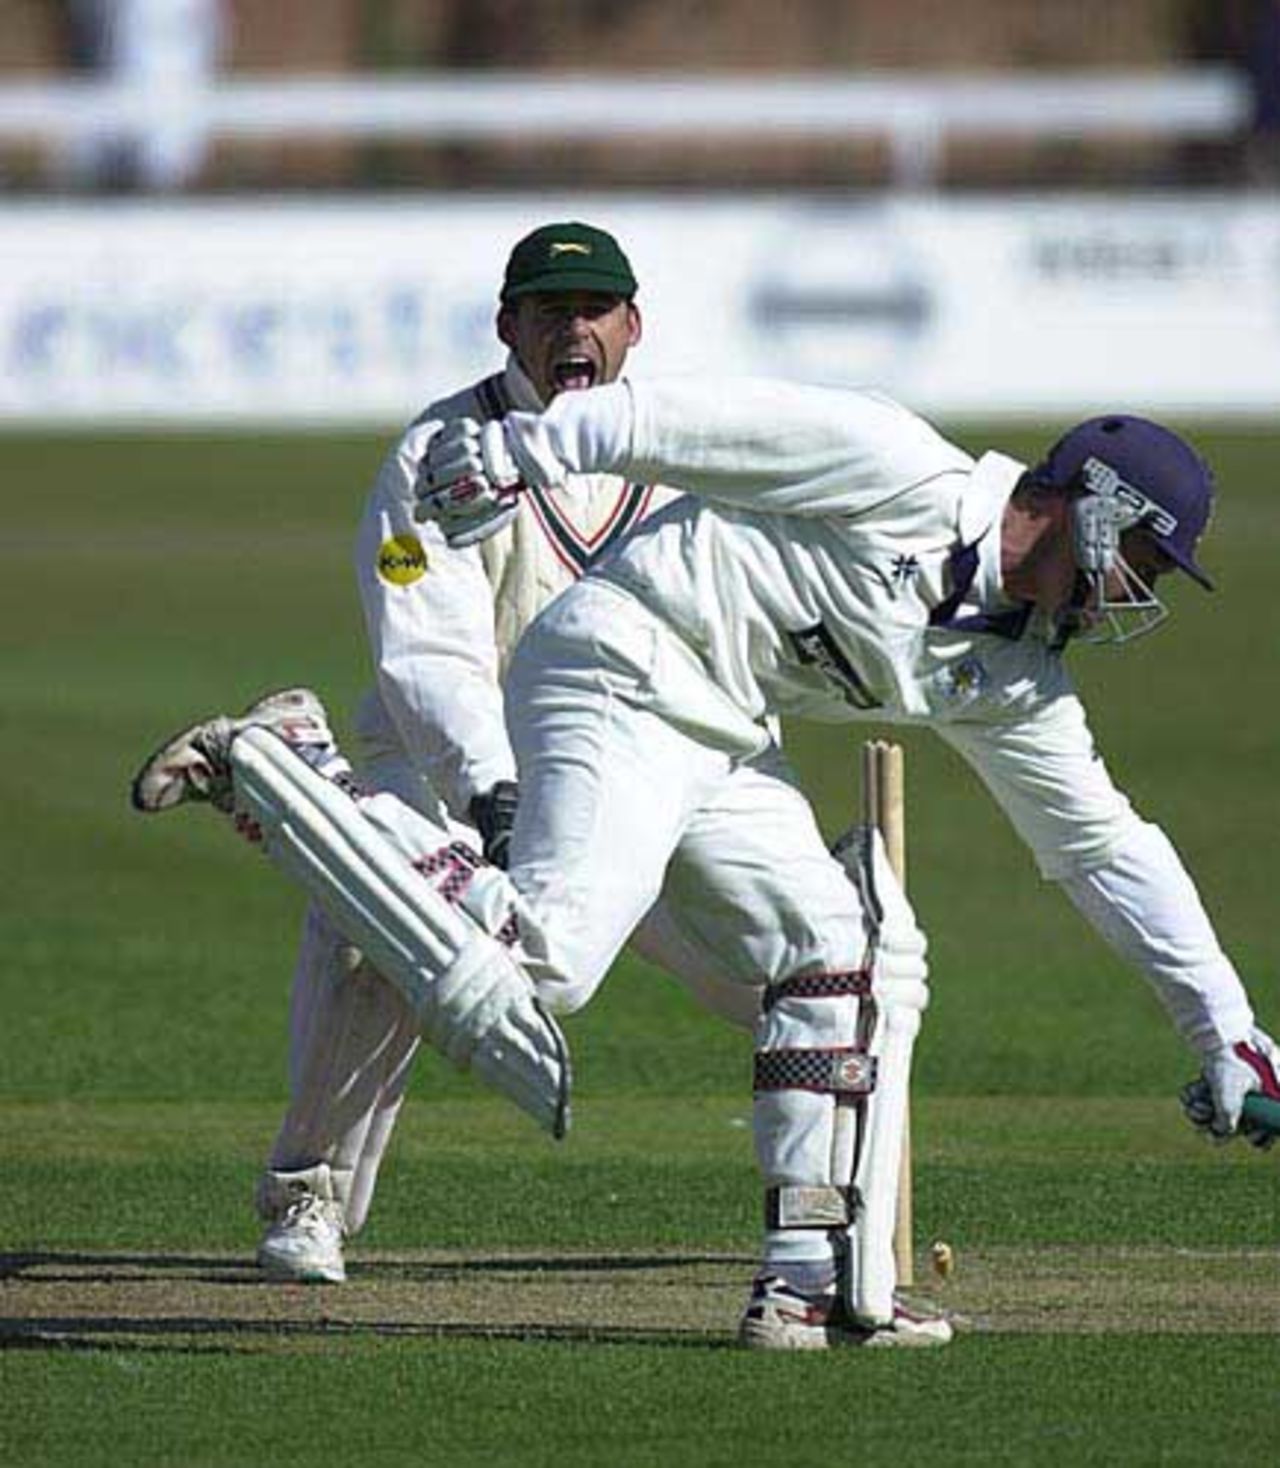 Leicestershire v Durham, Benson and Hedges Cup 2002, North Division, Grace Road Leicester, 29 April 2002